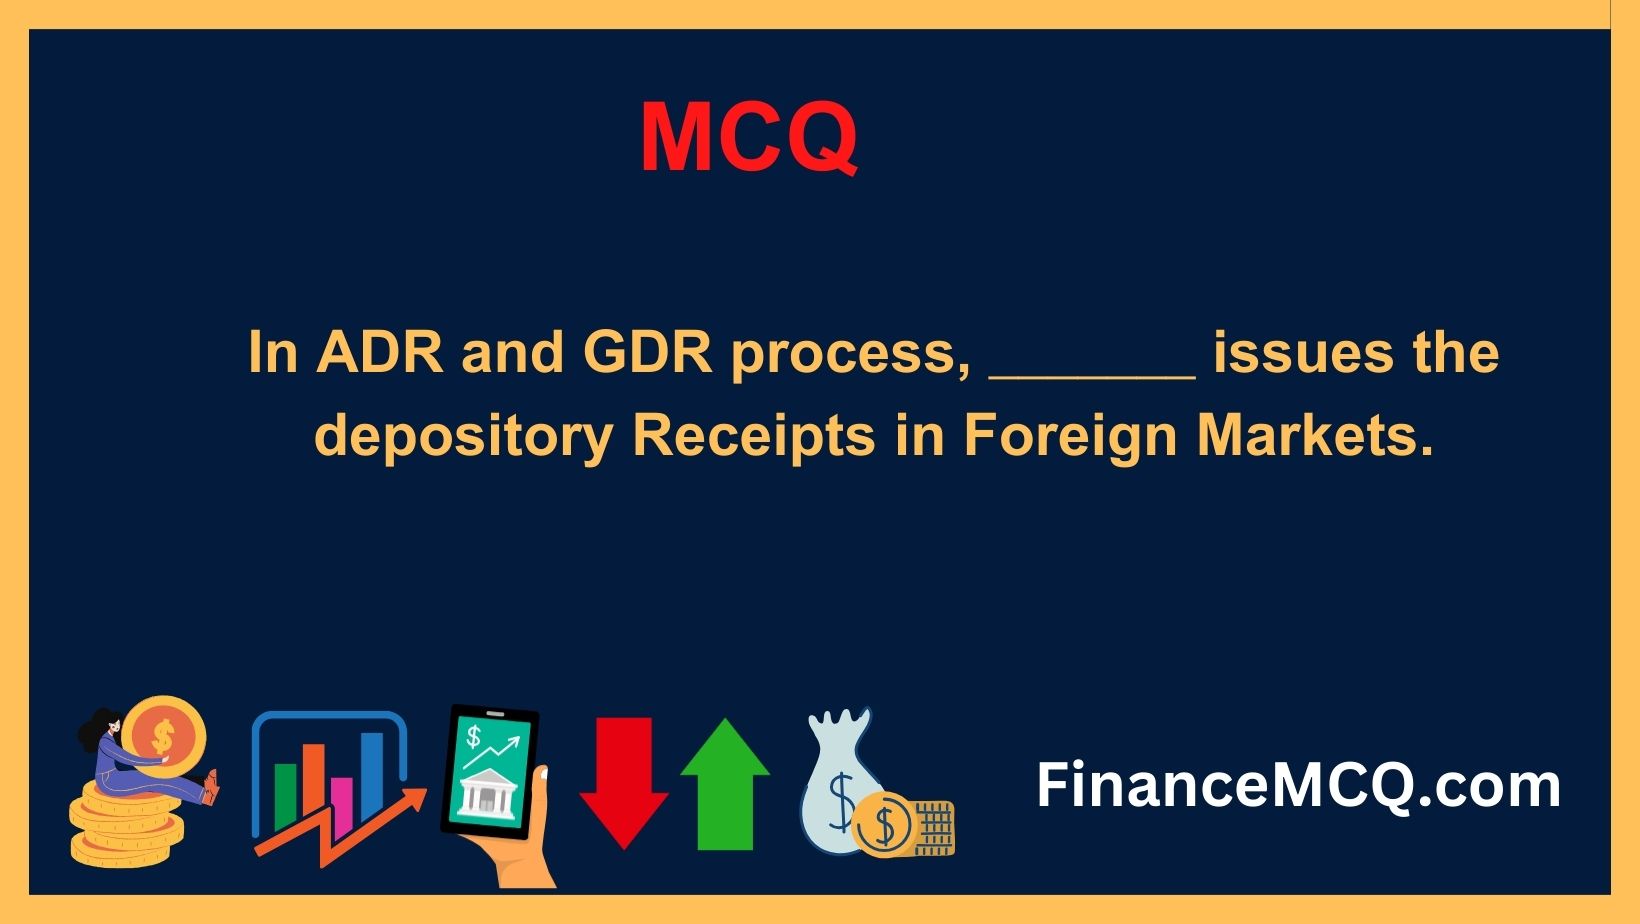 In ADR and GDR process, _______ issues the depository Receipts in Foreign Markets.